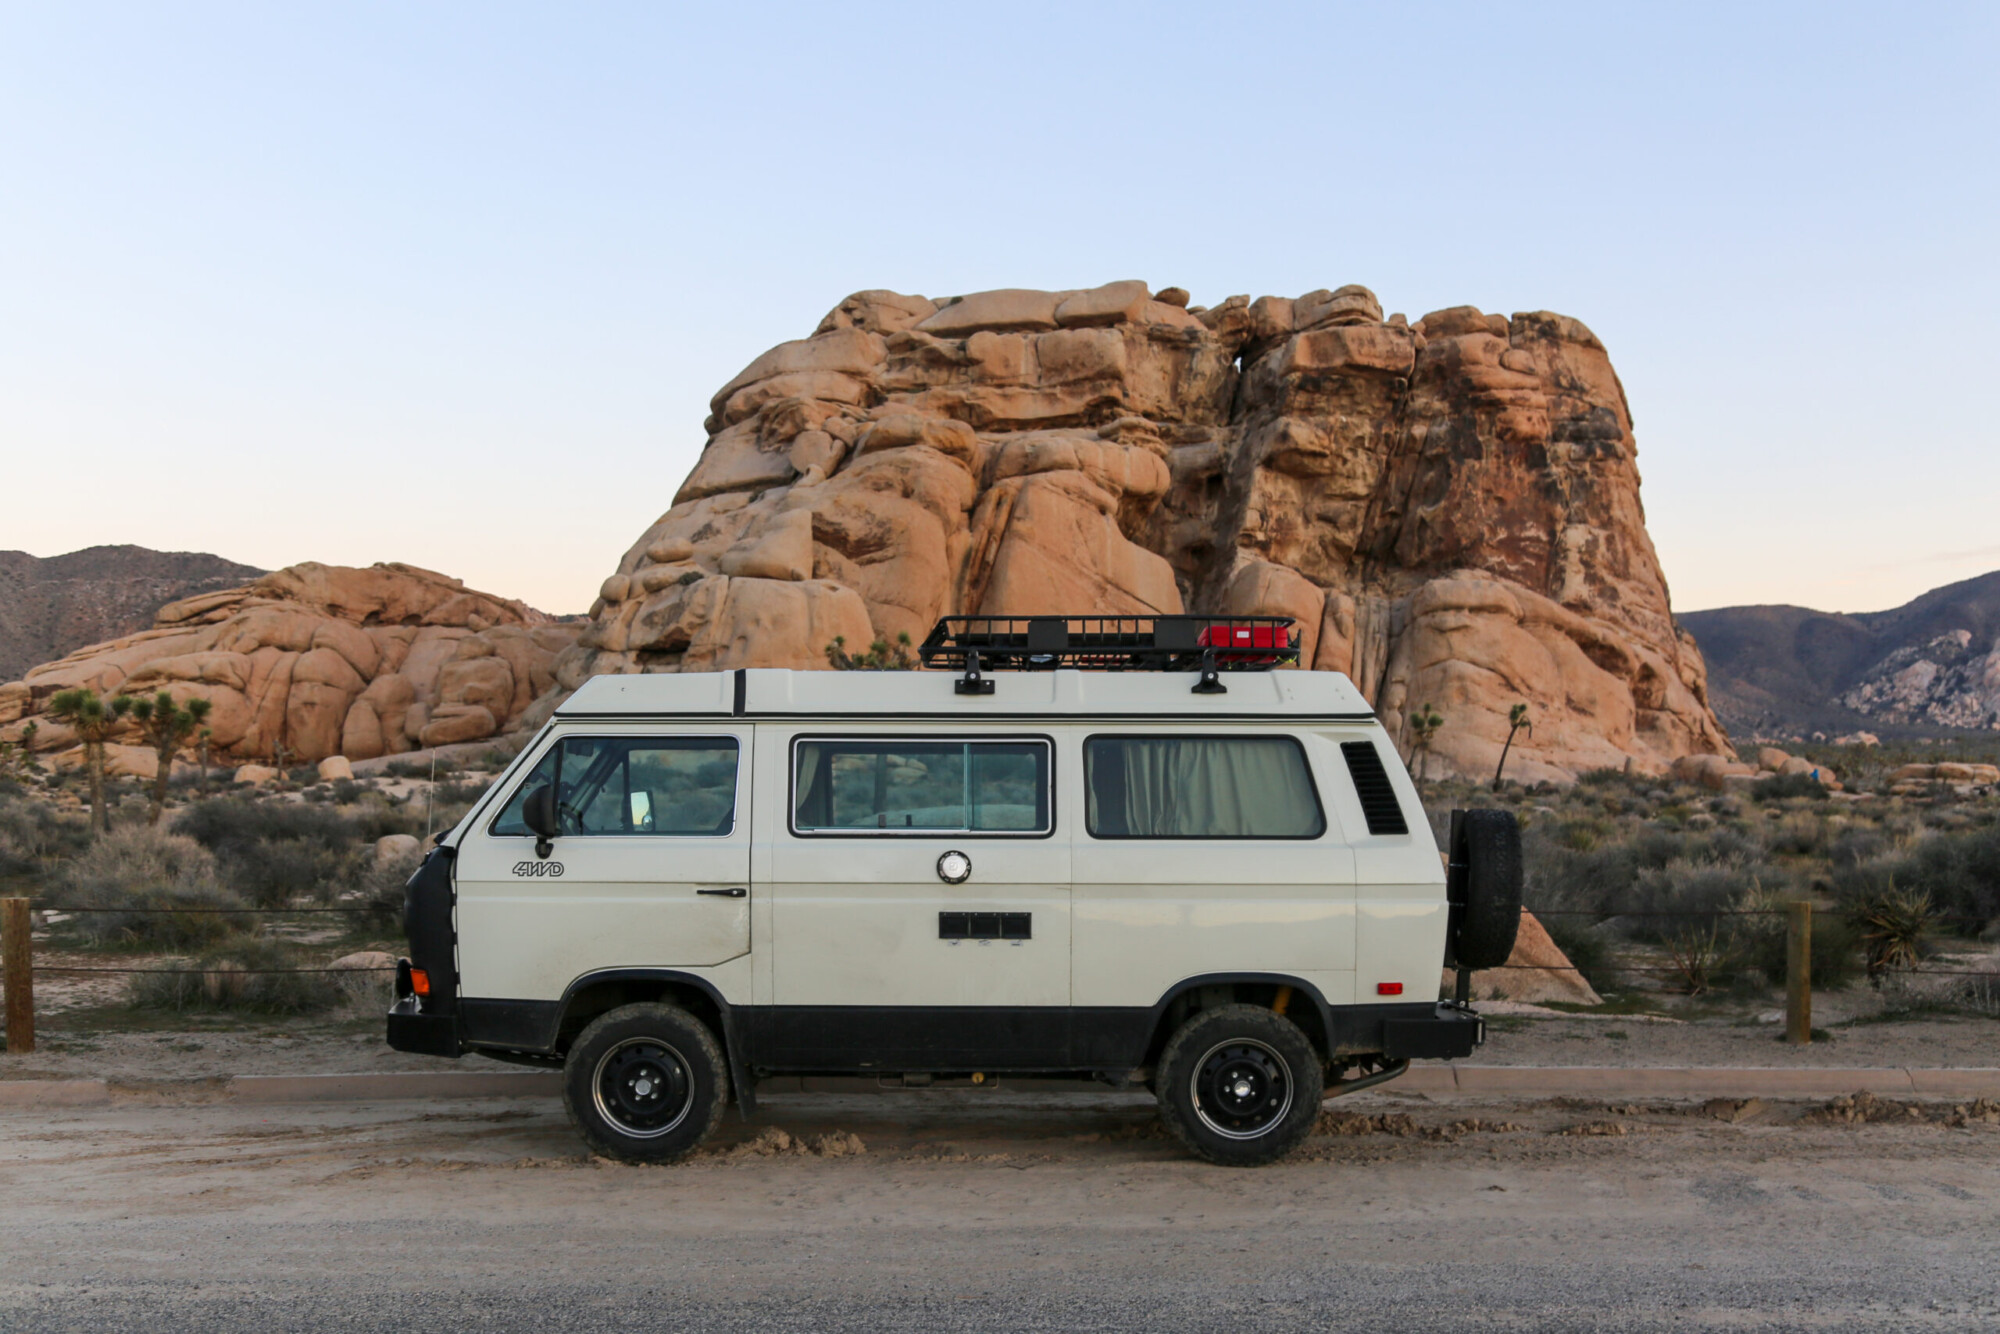 A beige adventure van parked in front of a boulder formation in Joshua Tree National Park, California.